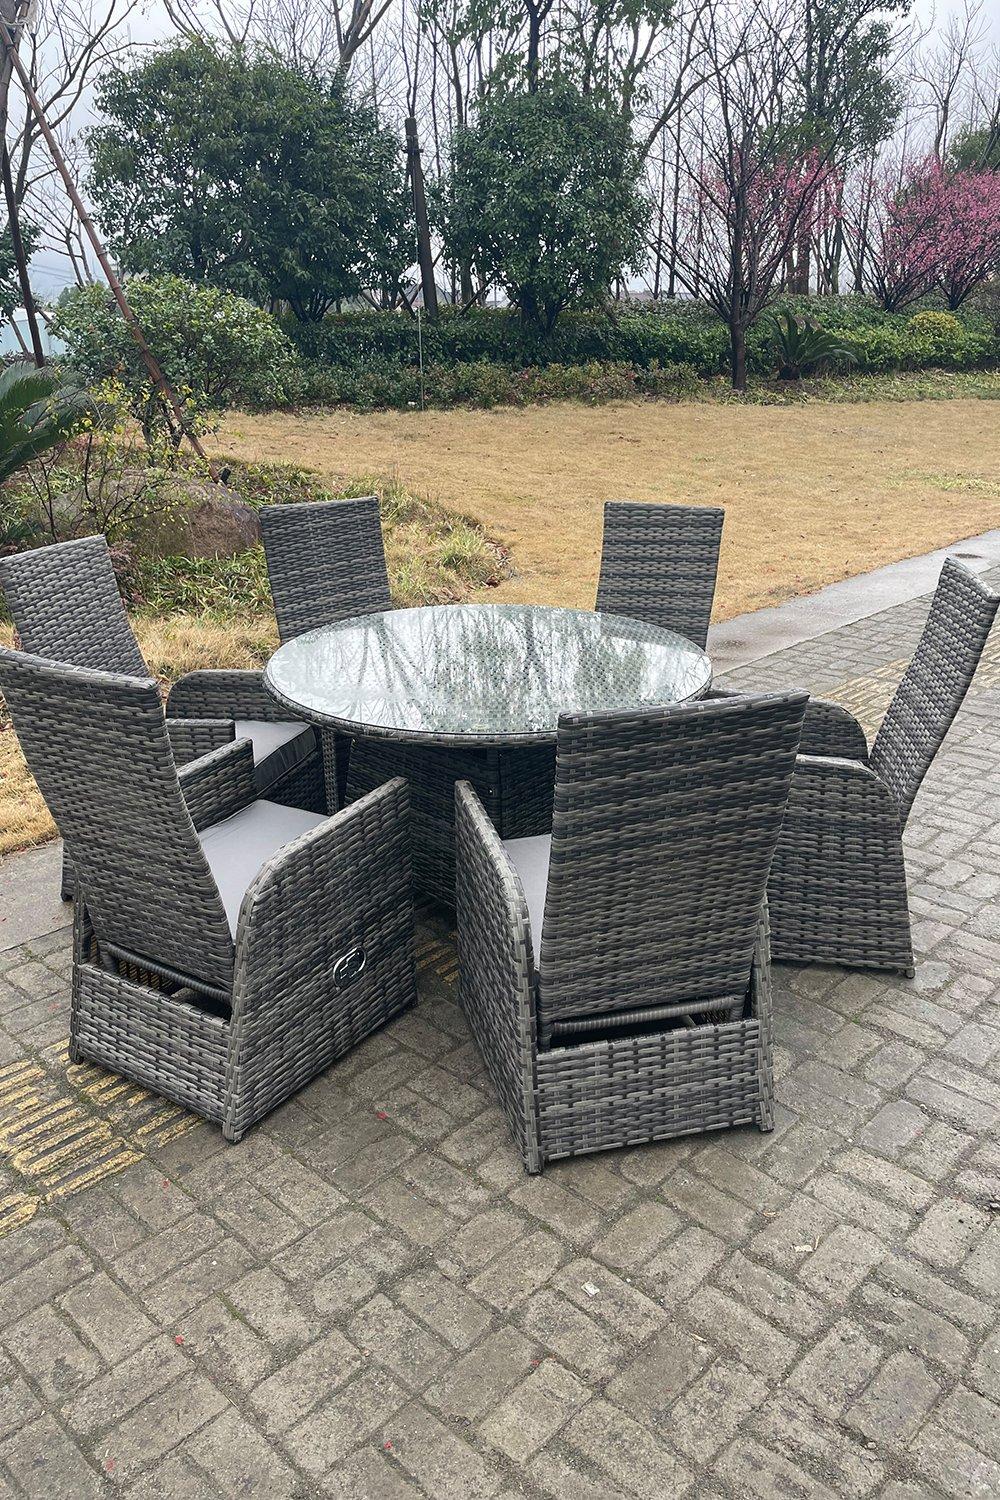 Fimous Outdoor Rattan Dining Sets Adjustable Chair Dining Table And Chair Sets 6 Seater Round Table|dark grey